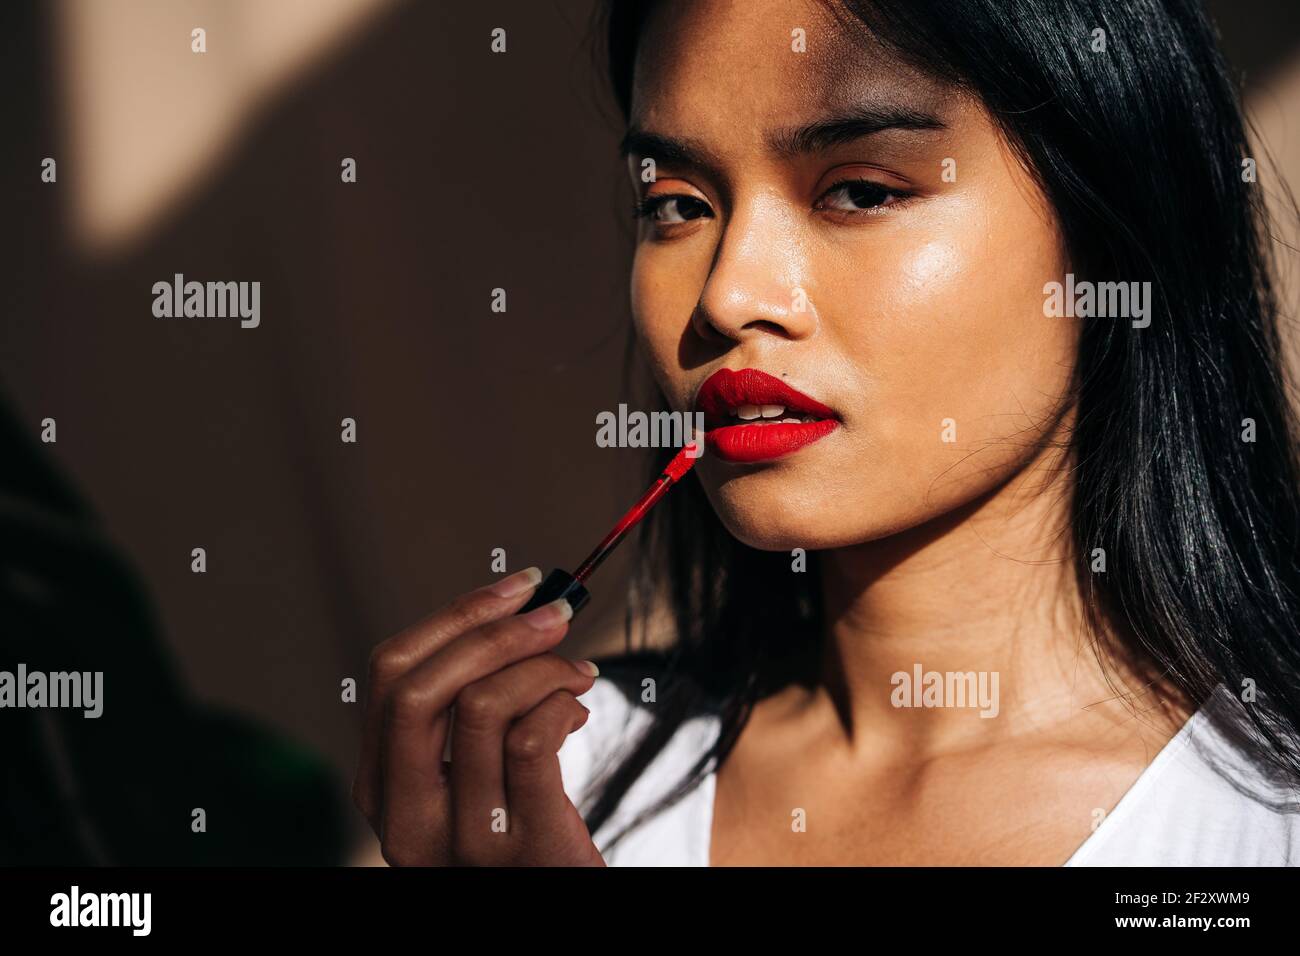 Portrait of crop thoughtful ethnic female with long dark hair looking at camera and rouging lips with red lipstick Stock Photo